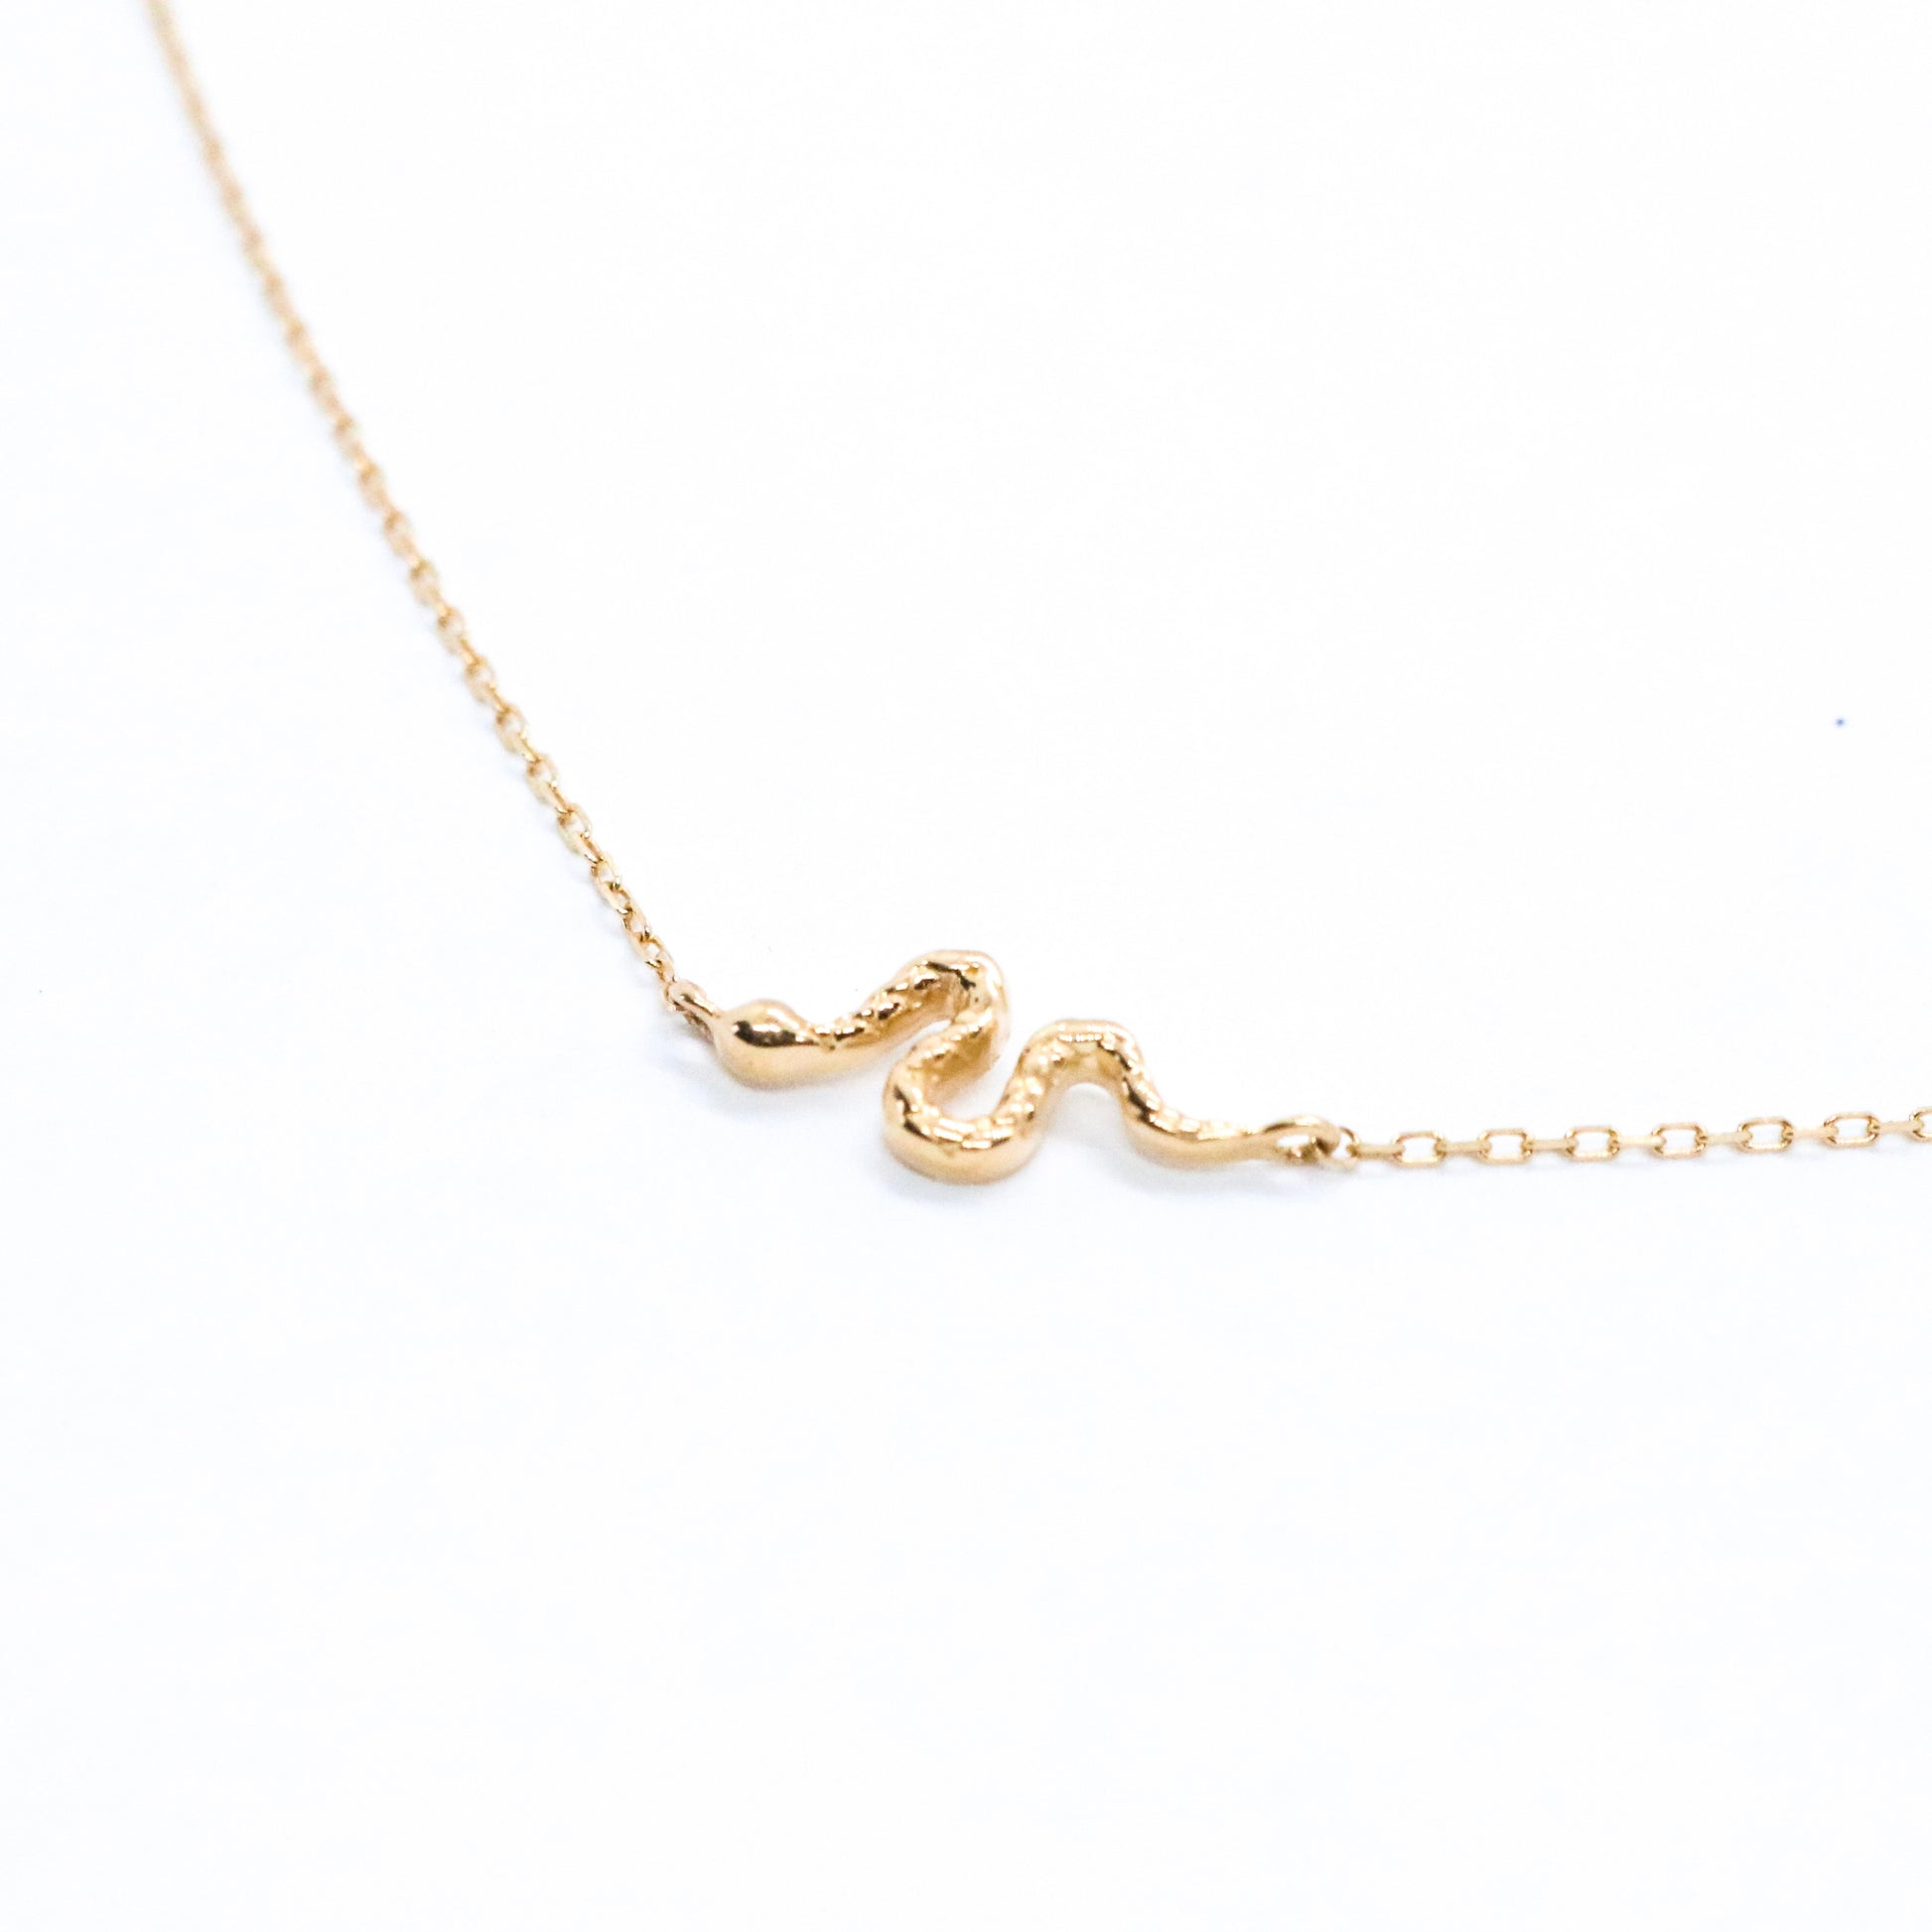 solid 14k gold serpent snake necklace on a white background